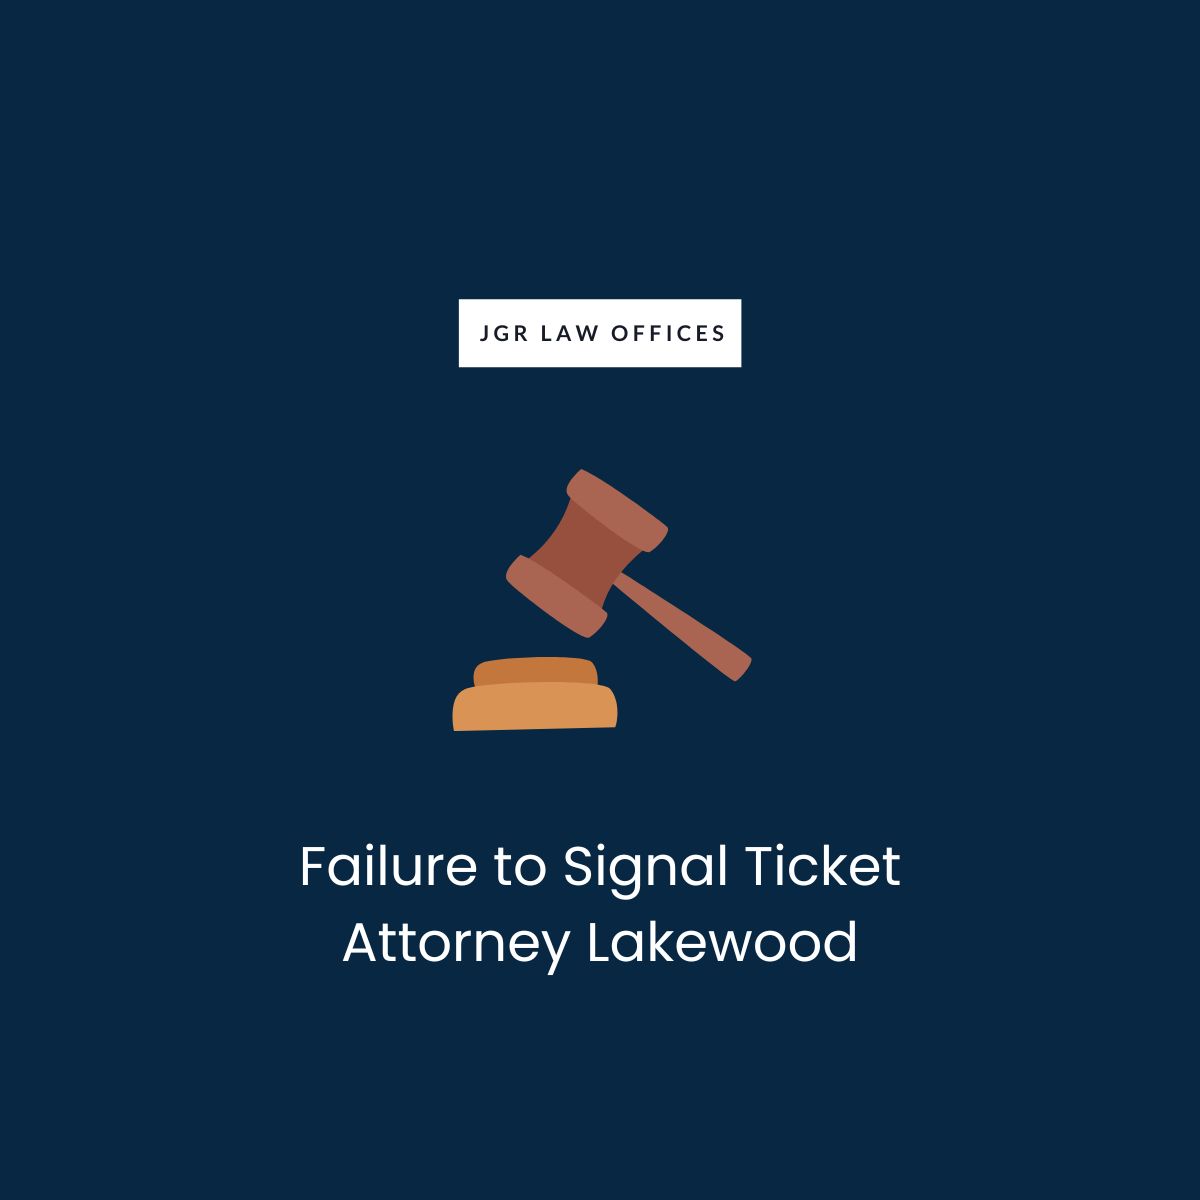 Failure to Signal Ticket Attorney Lakewood